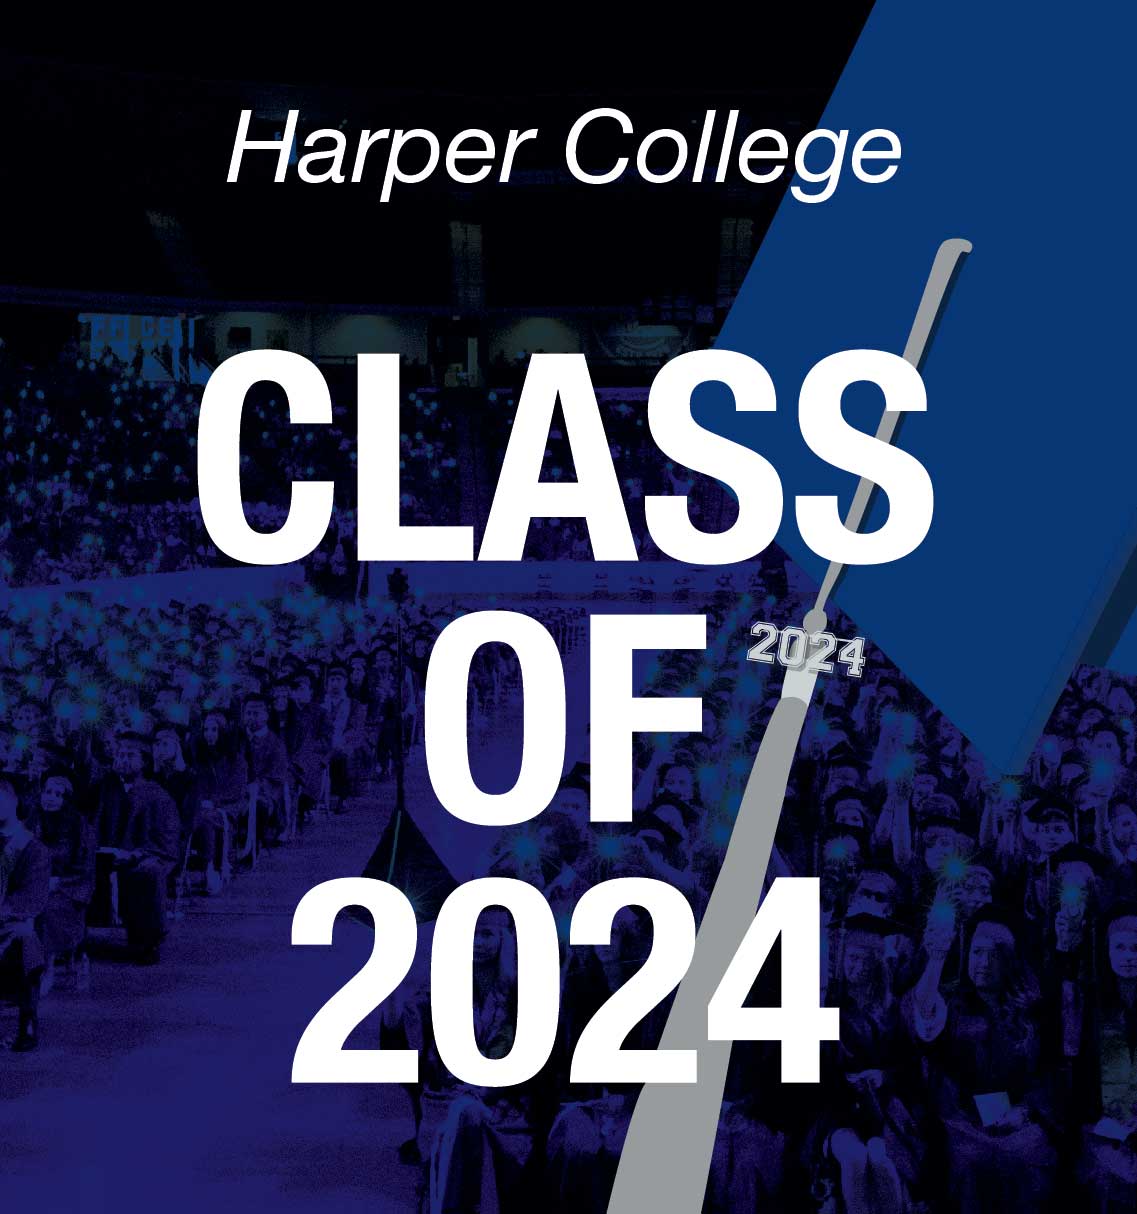 Class of 2024 graphic